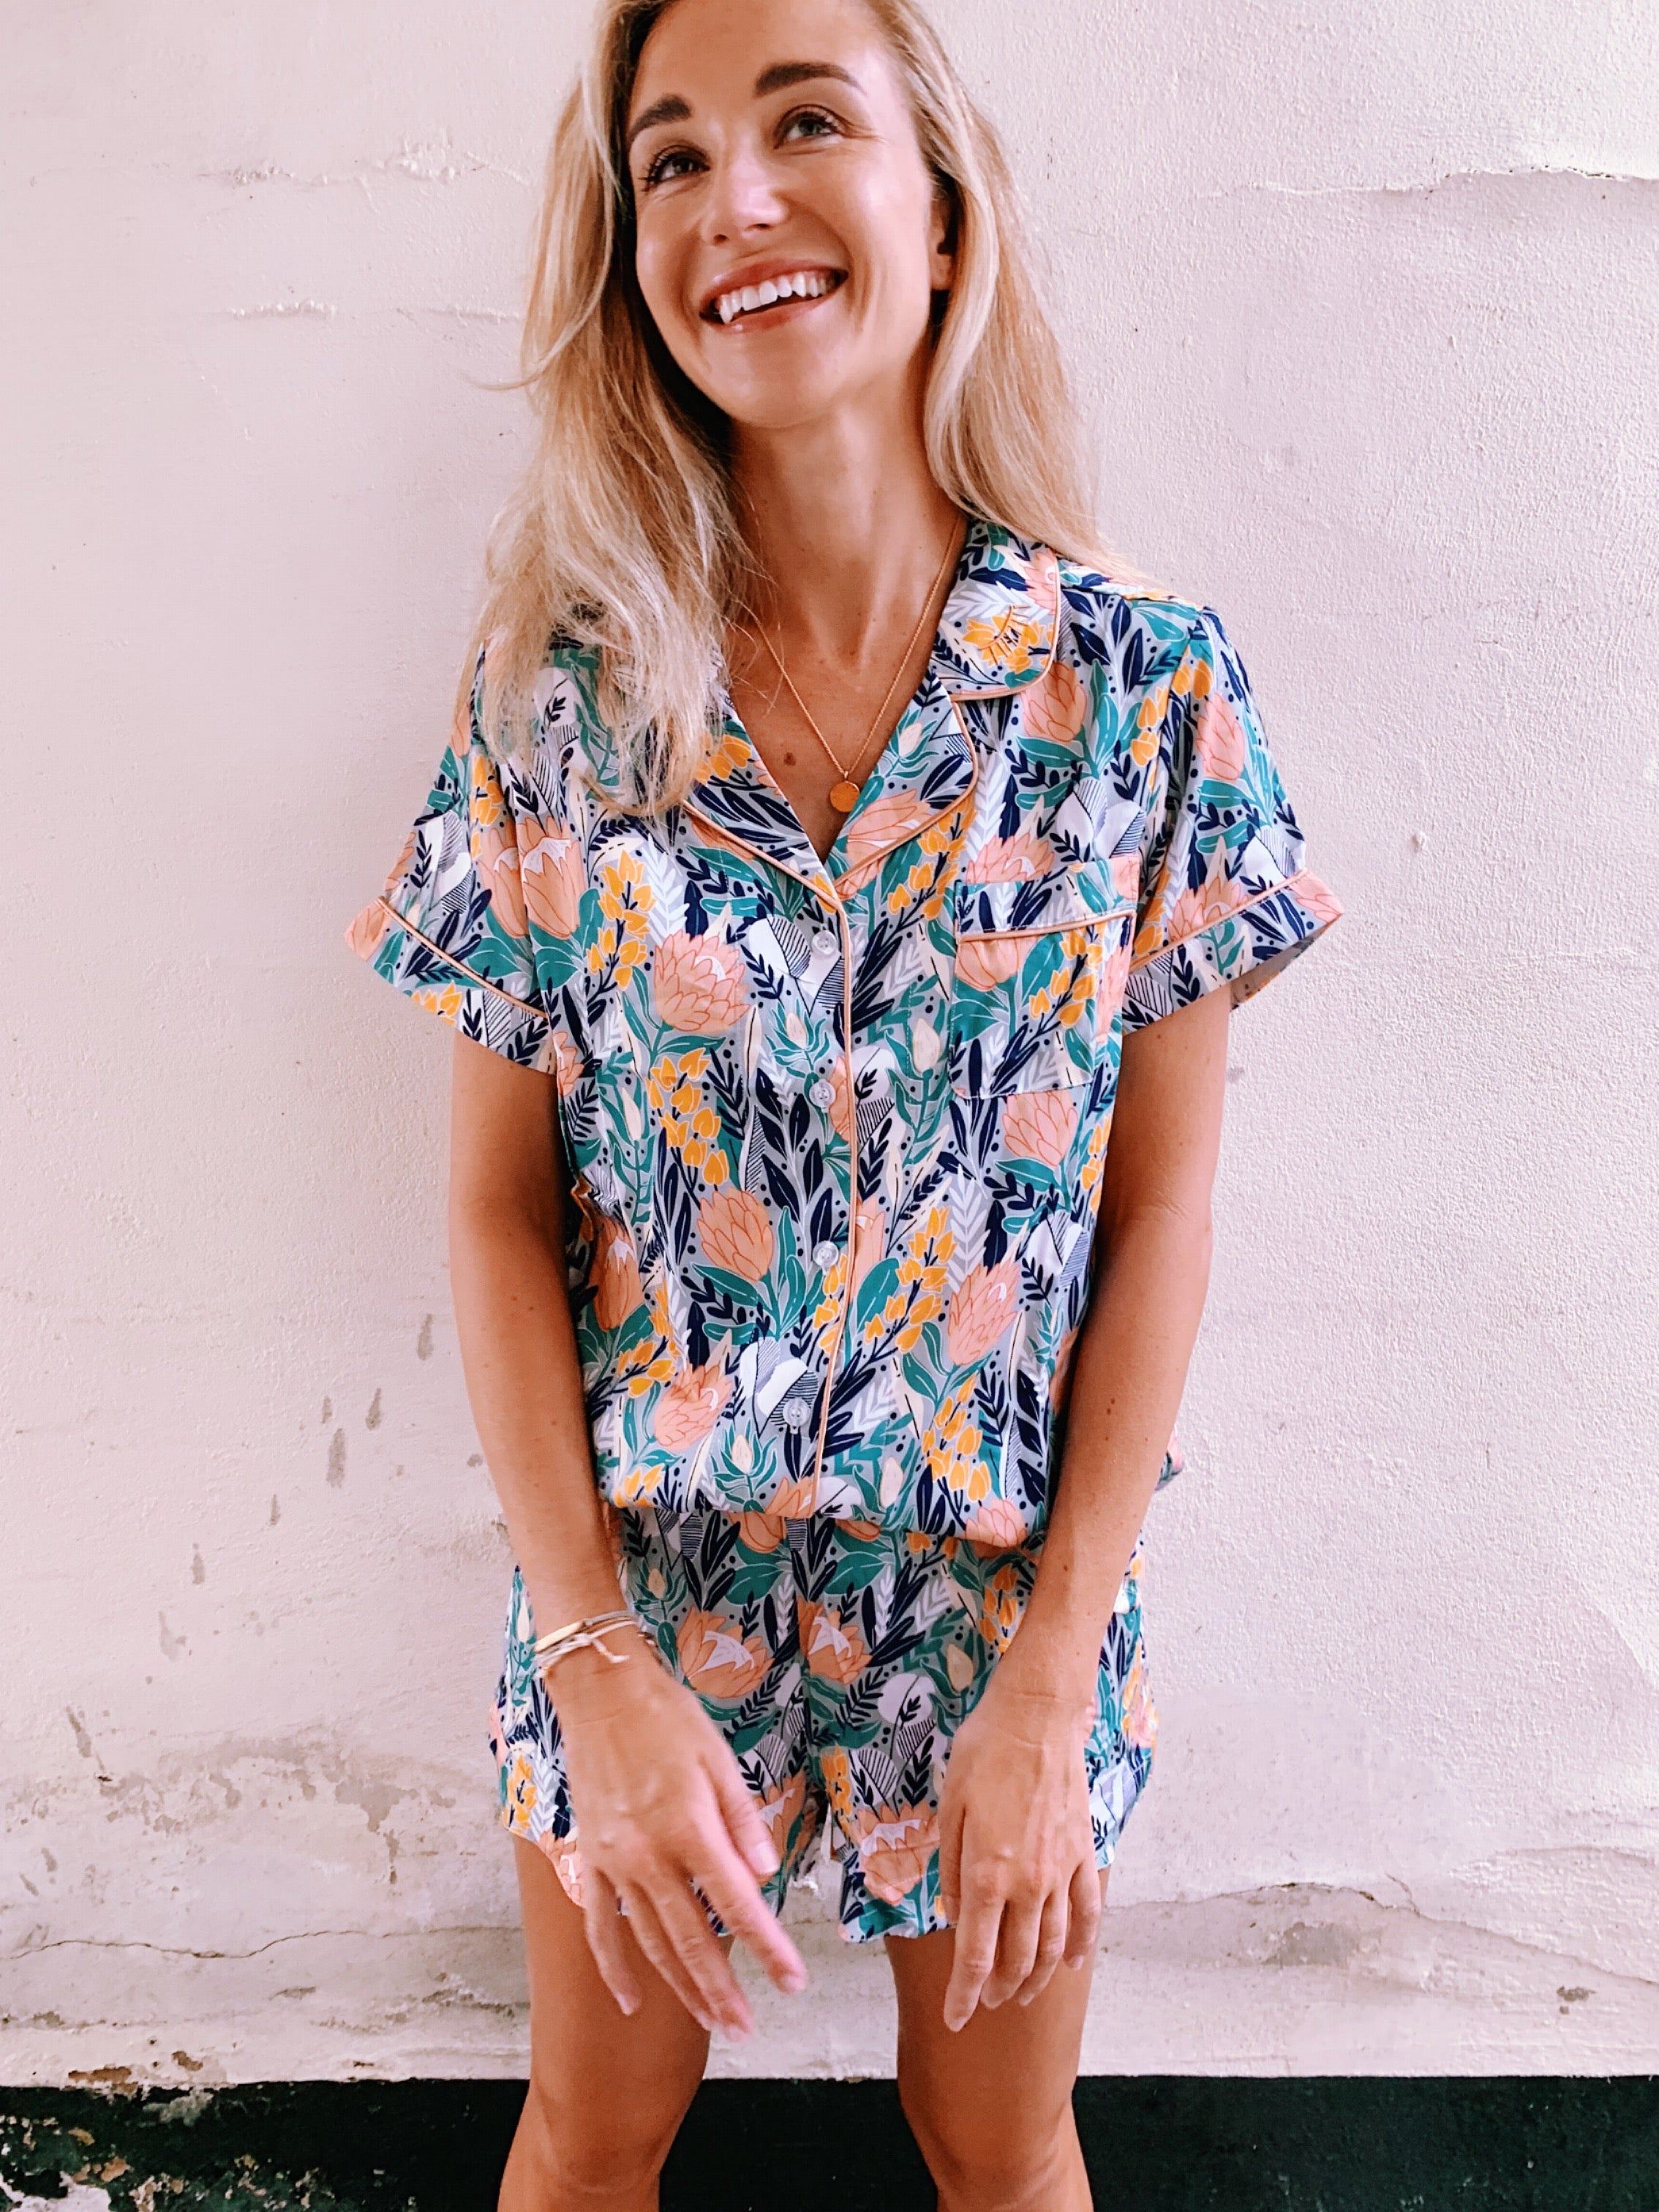 Fresh Floral Printed PJ's for summer